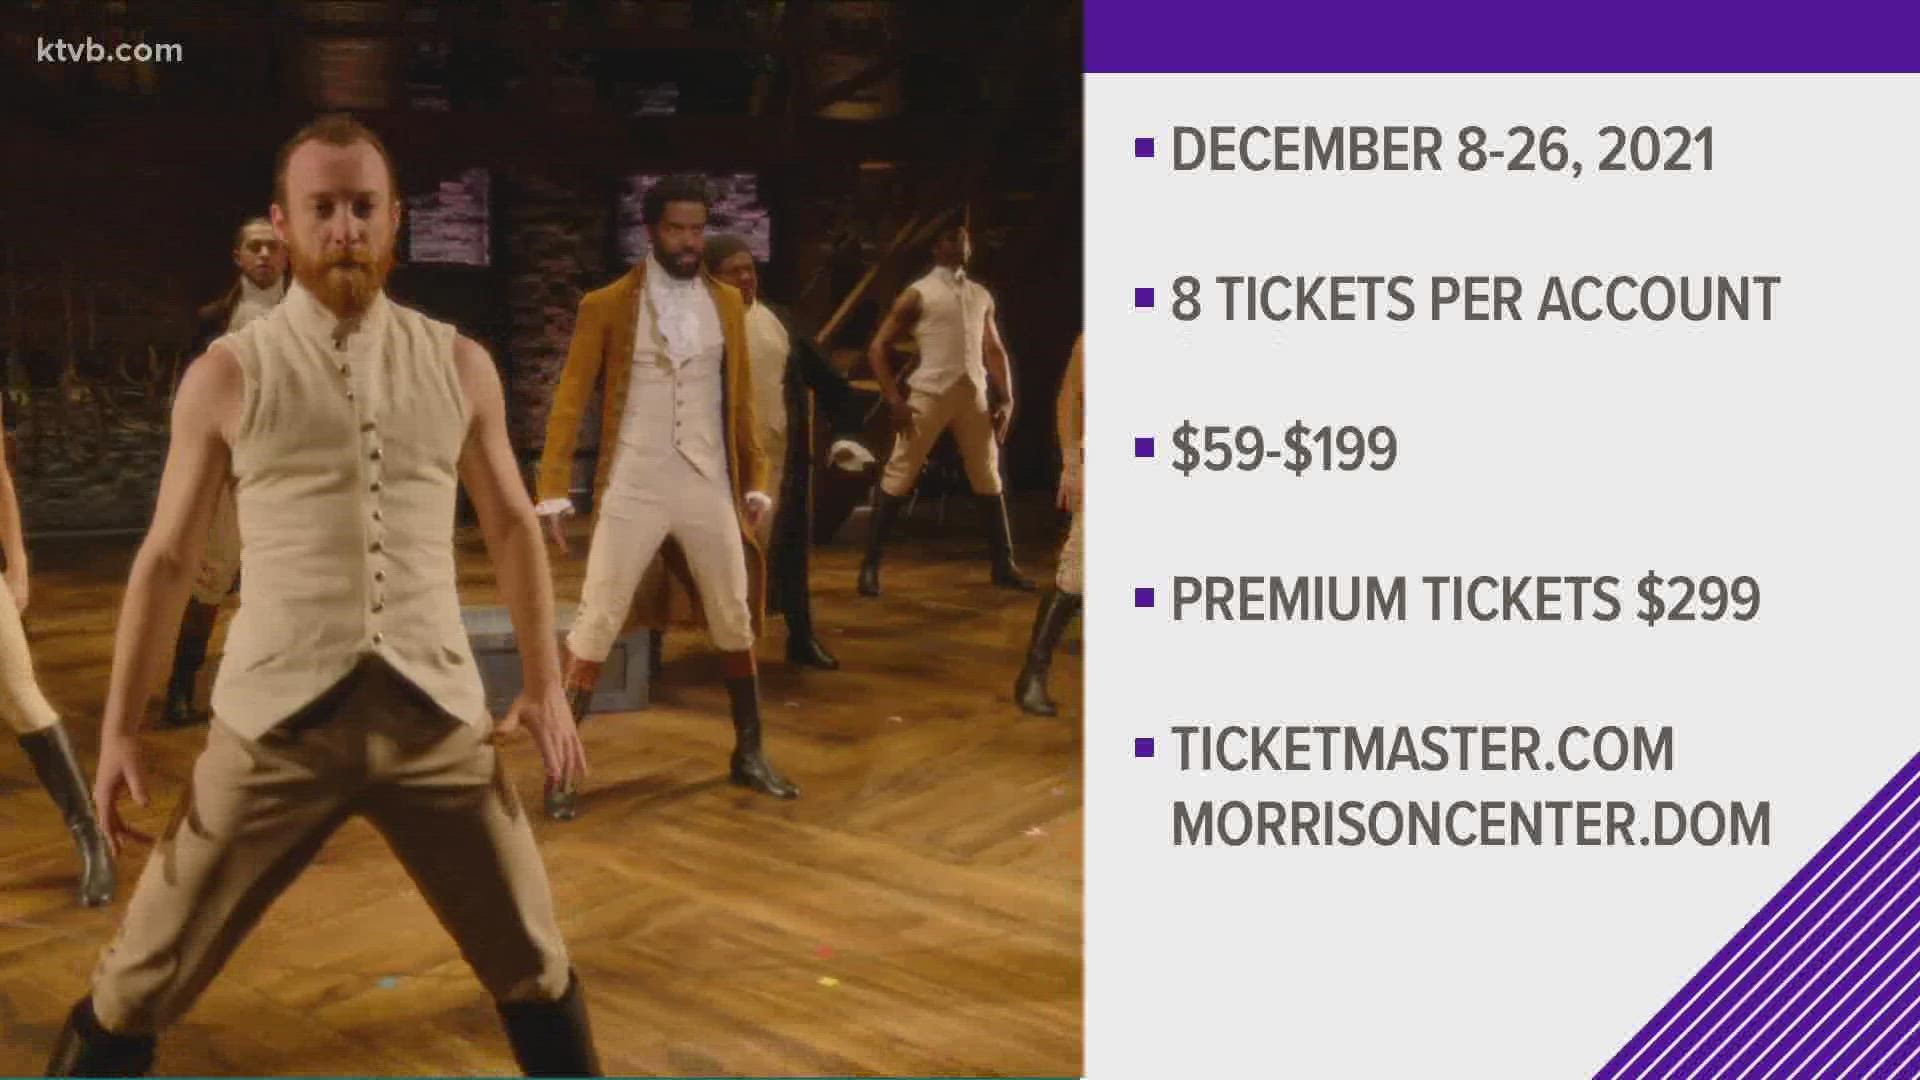 Each patron can purchase up to 8 tickets. The performances run from December 8-23.